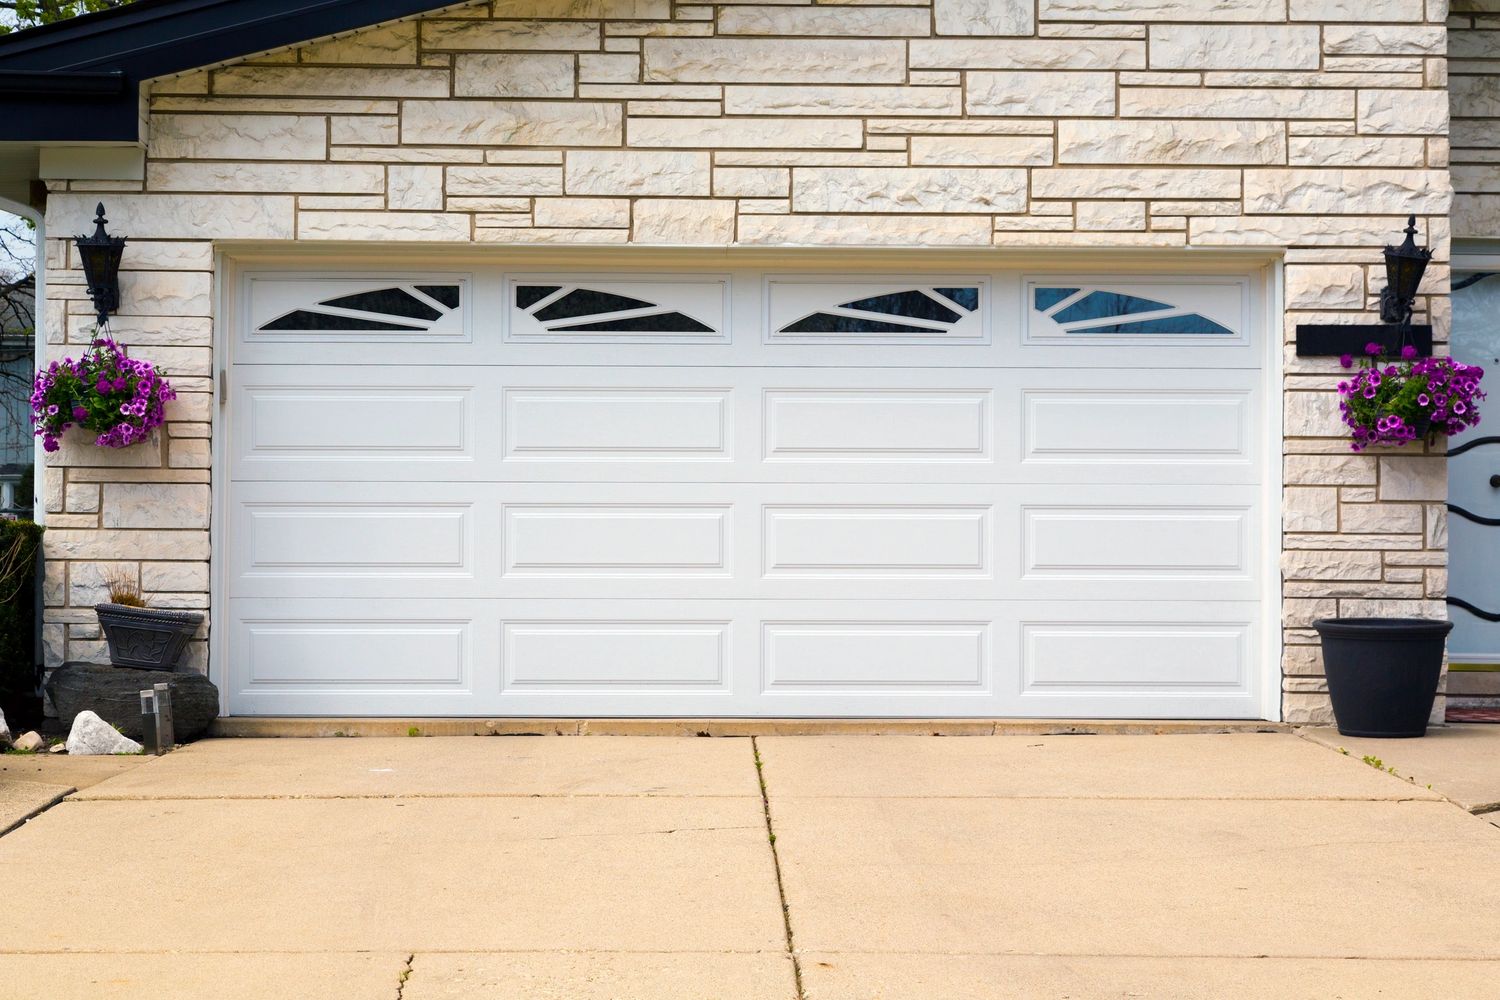 MST garage door repair inc is a family owned business that was established in 2005 